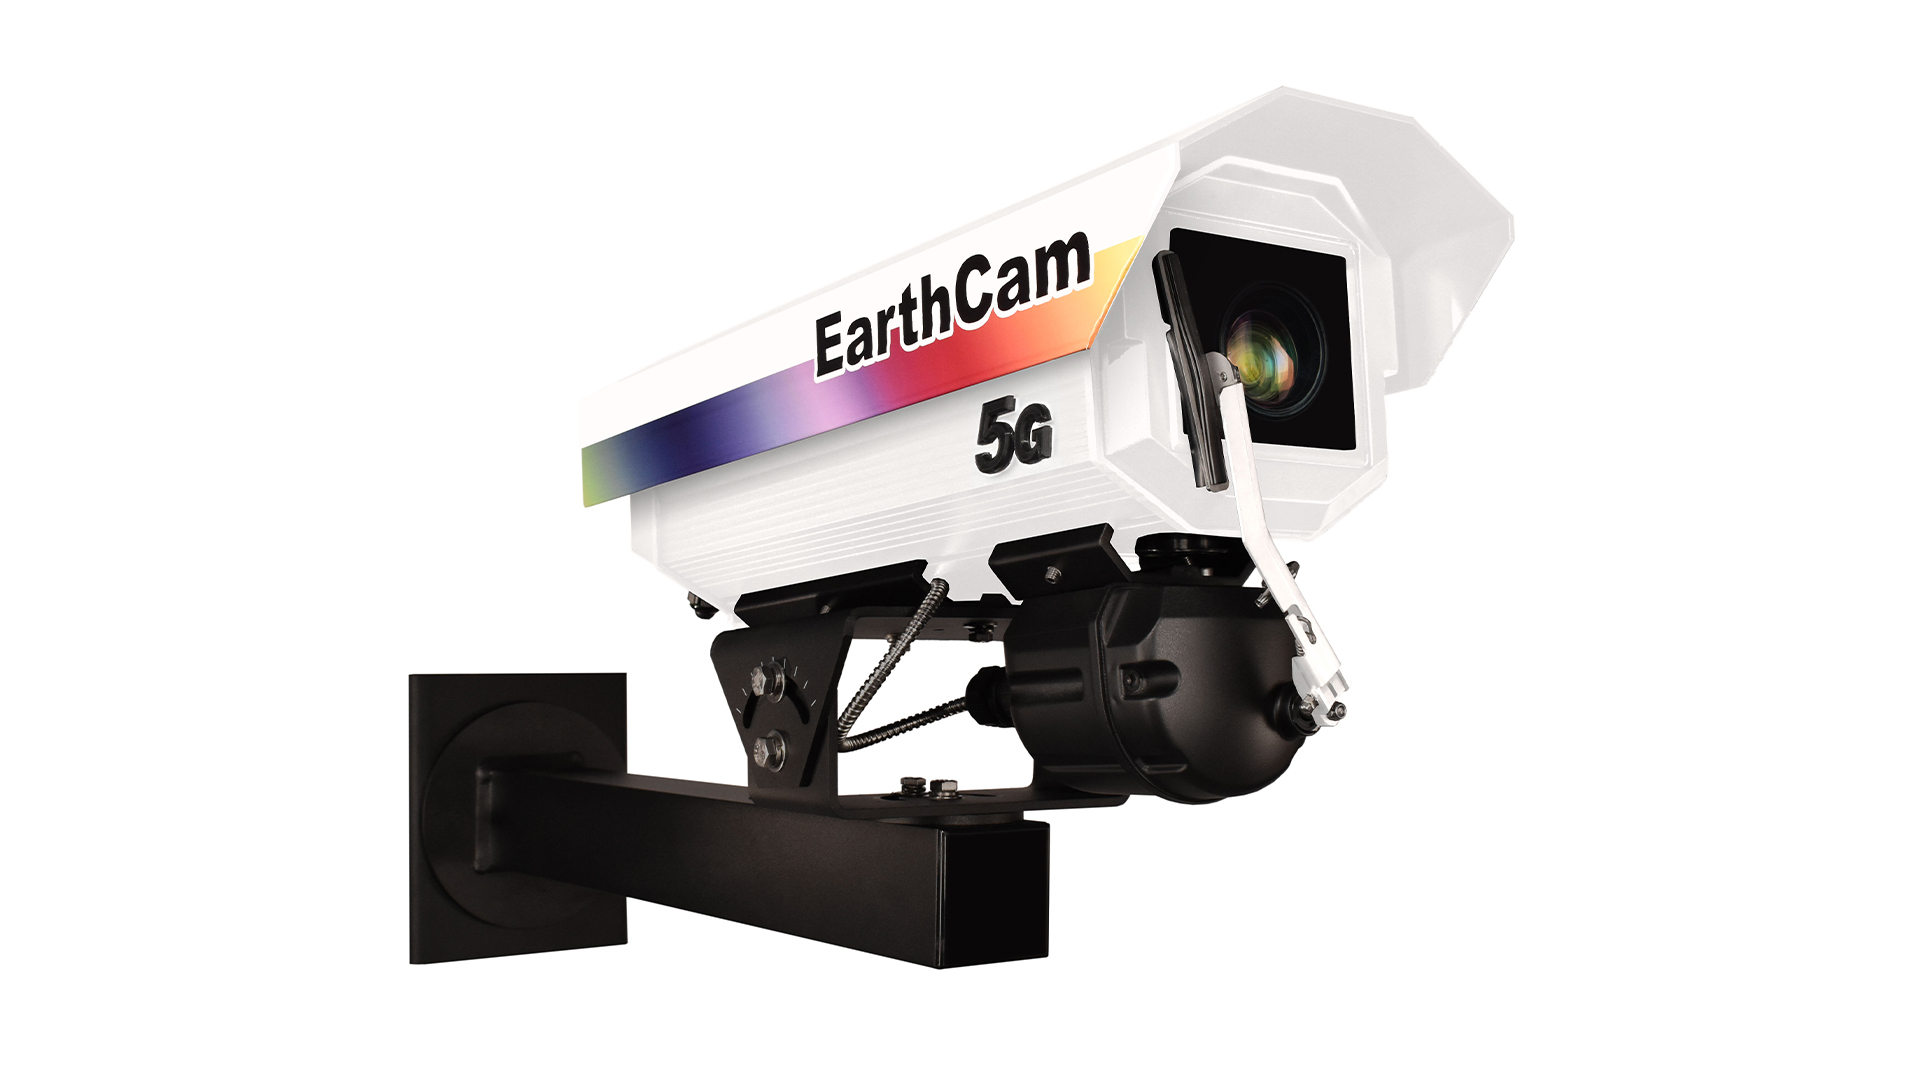 EarthCam’s new StreamCam 5G, the world’s first 5G multi-network camera system